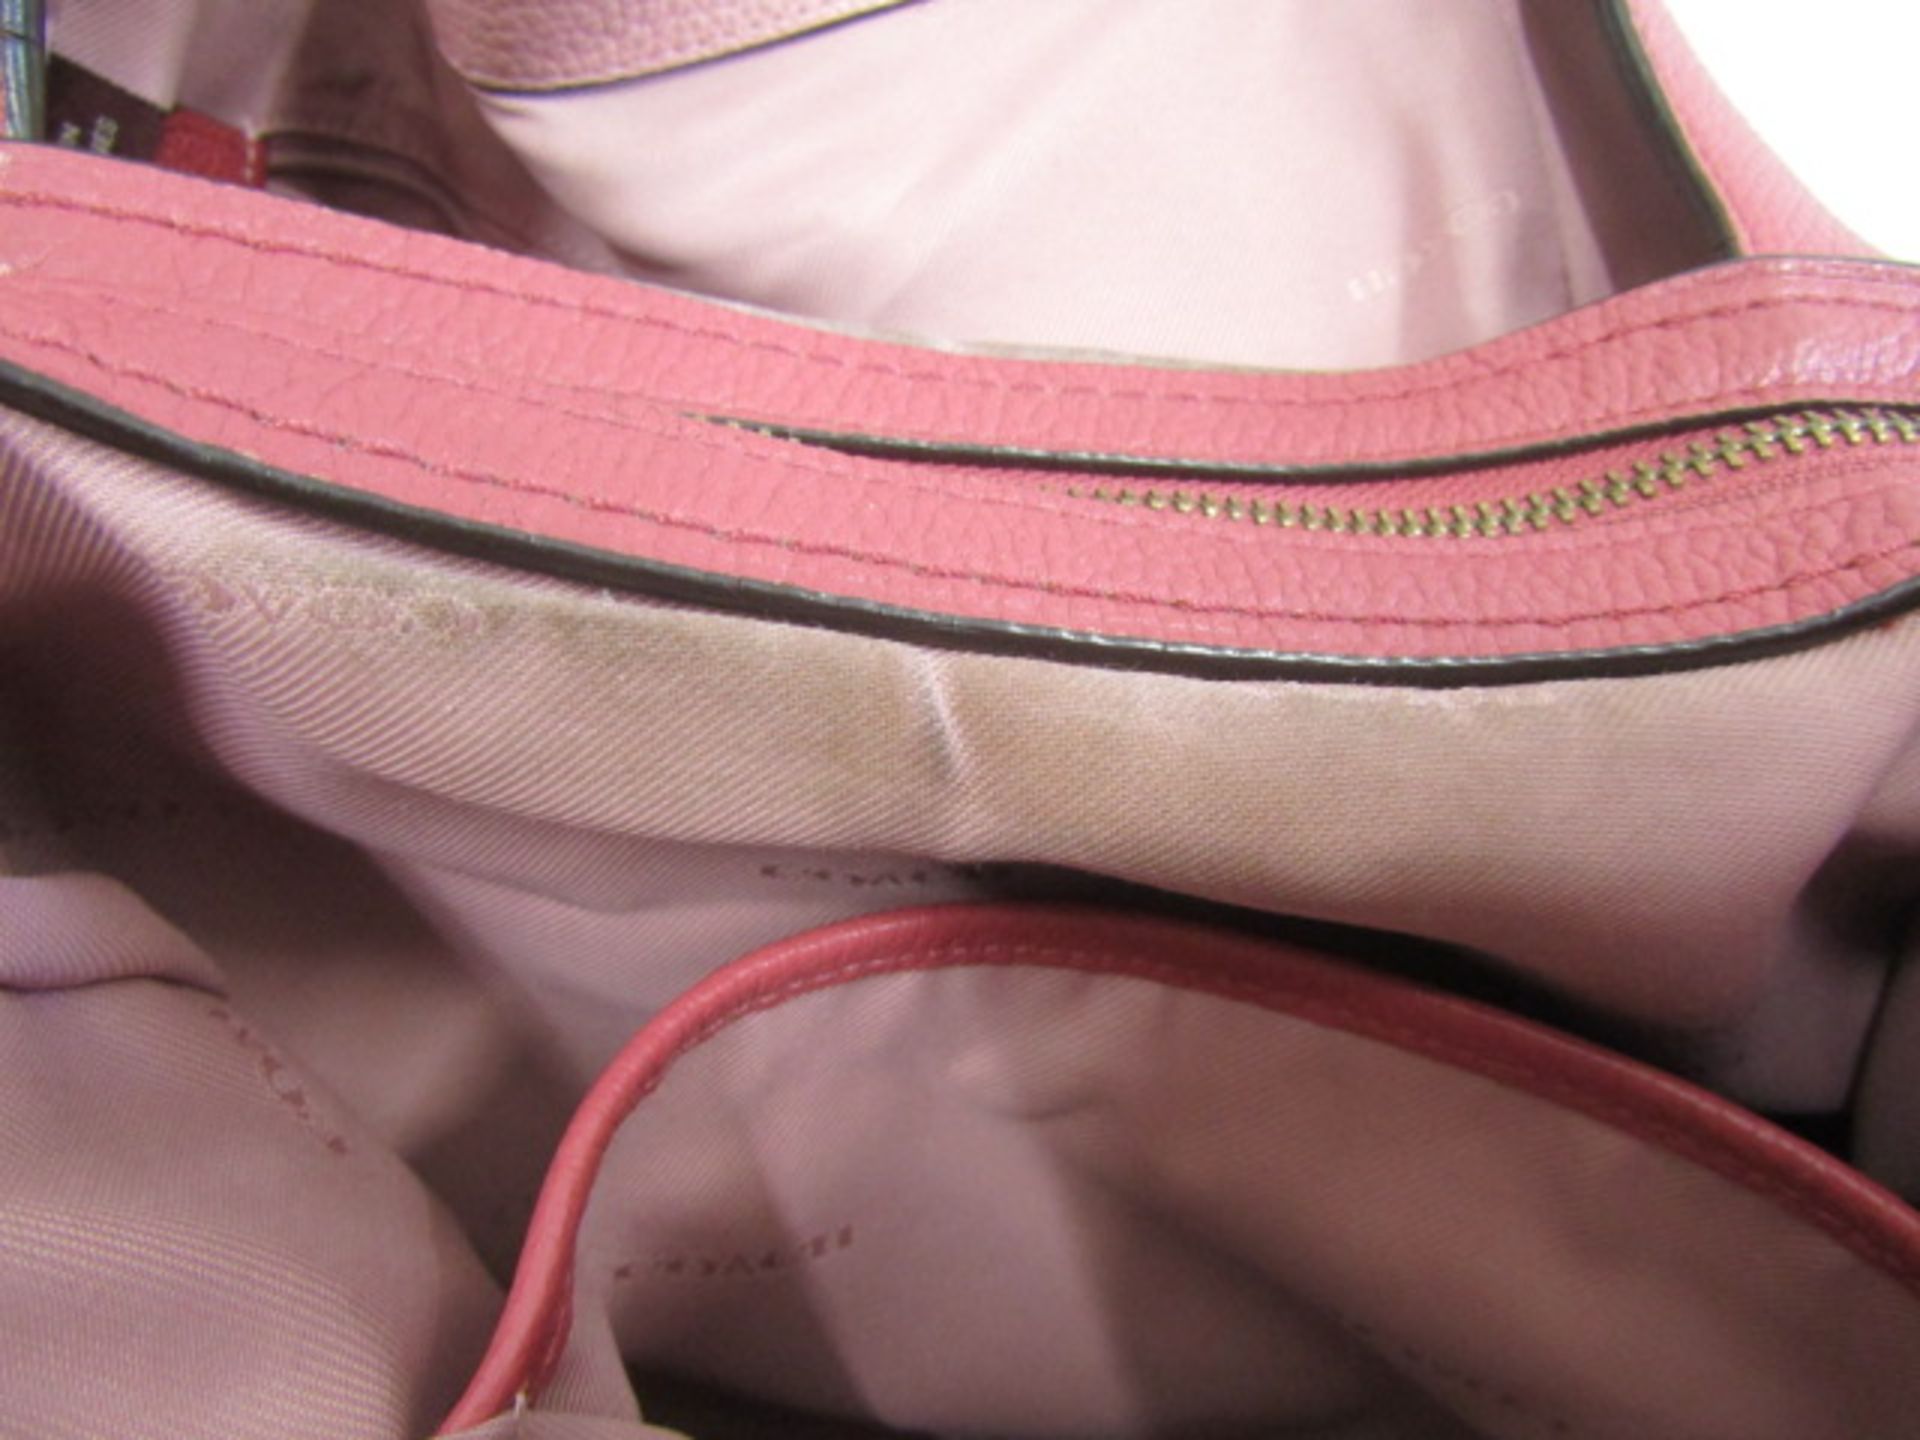 Coach pink pebble leather tote bag with dust bag - Image 7 of 7